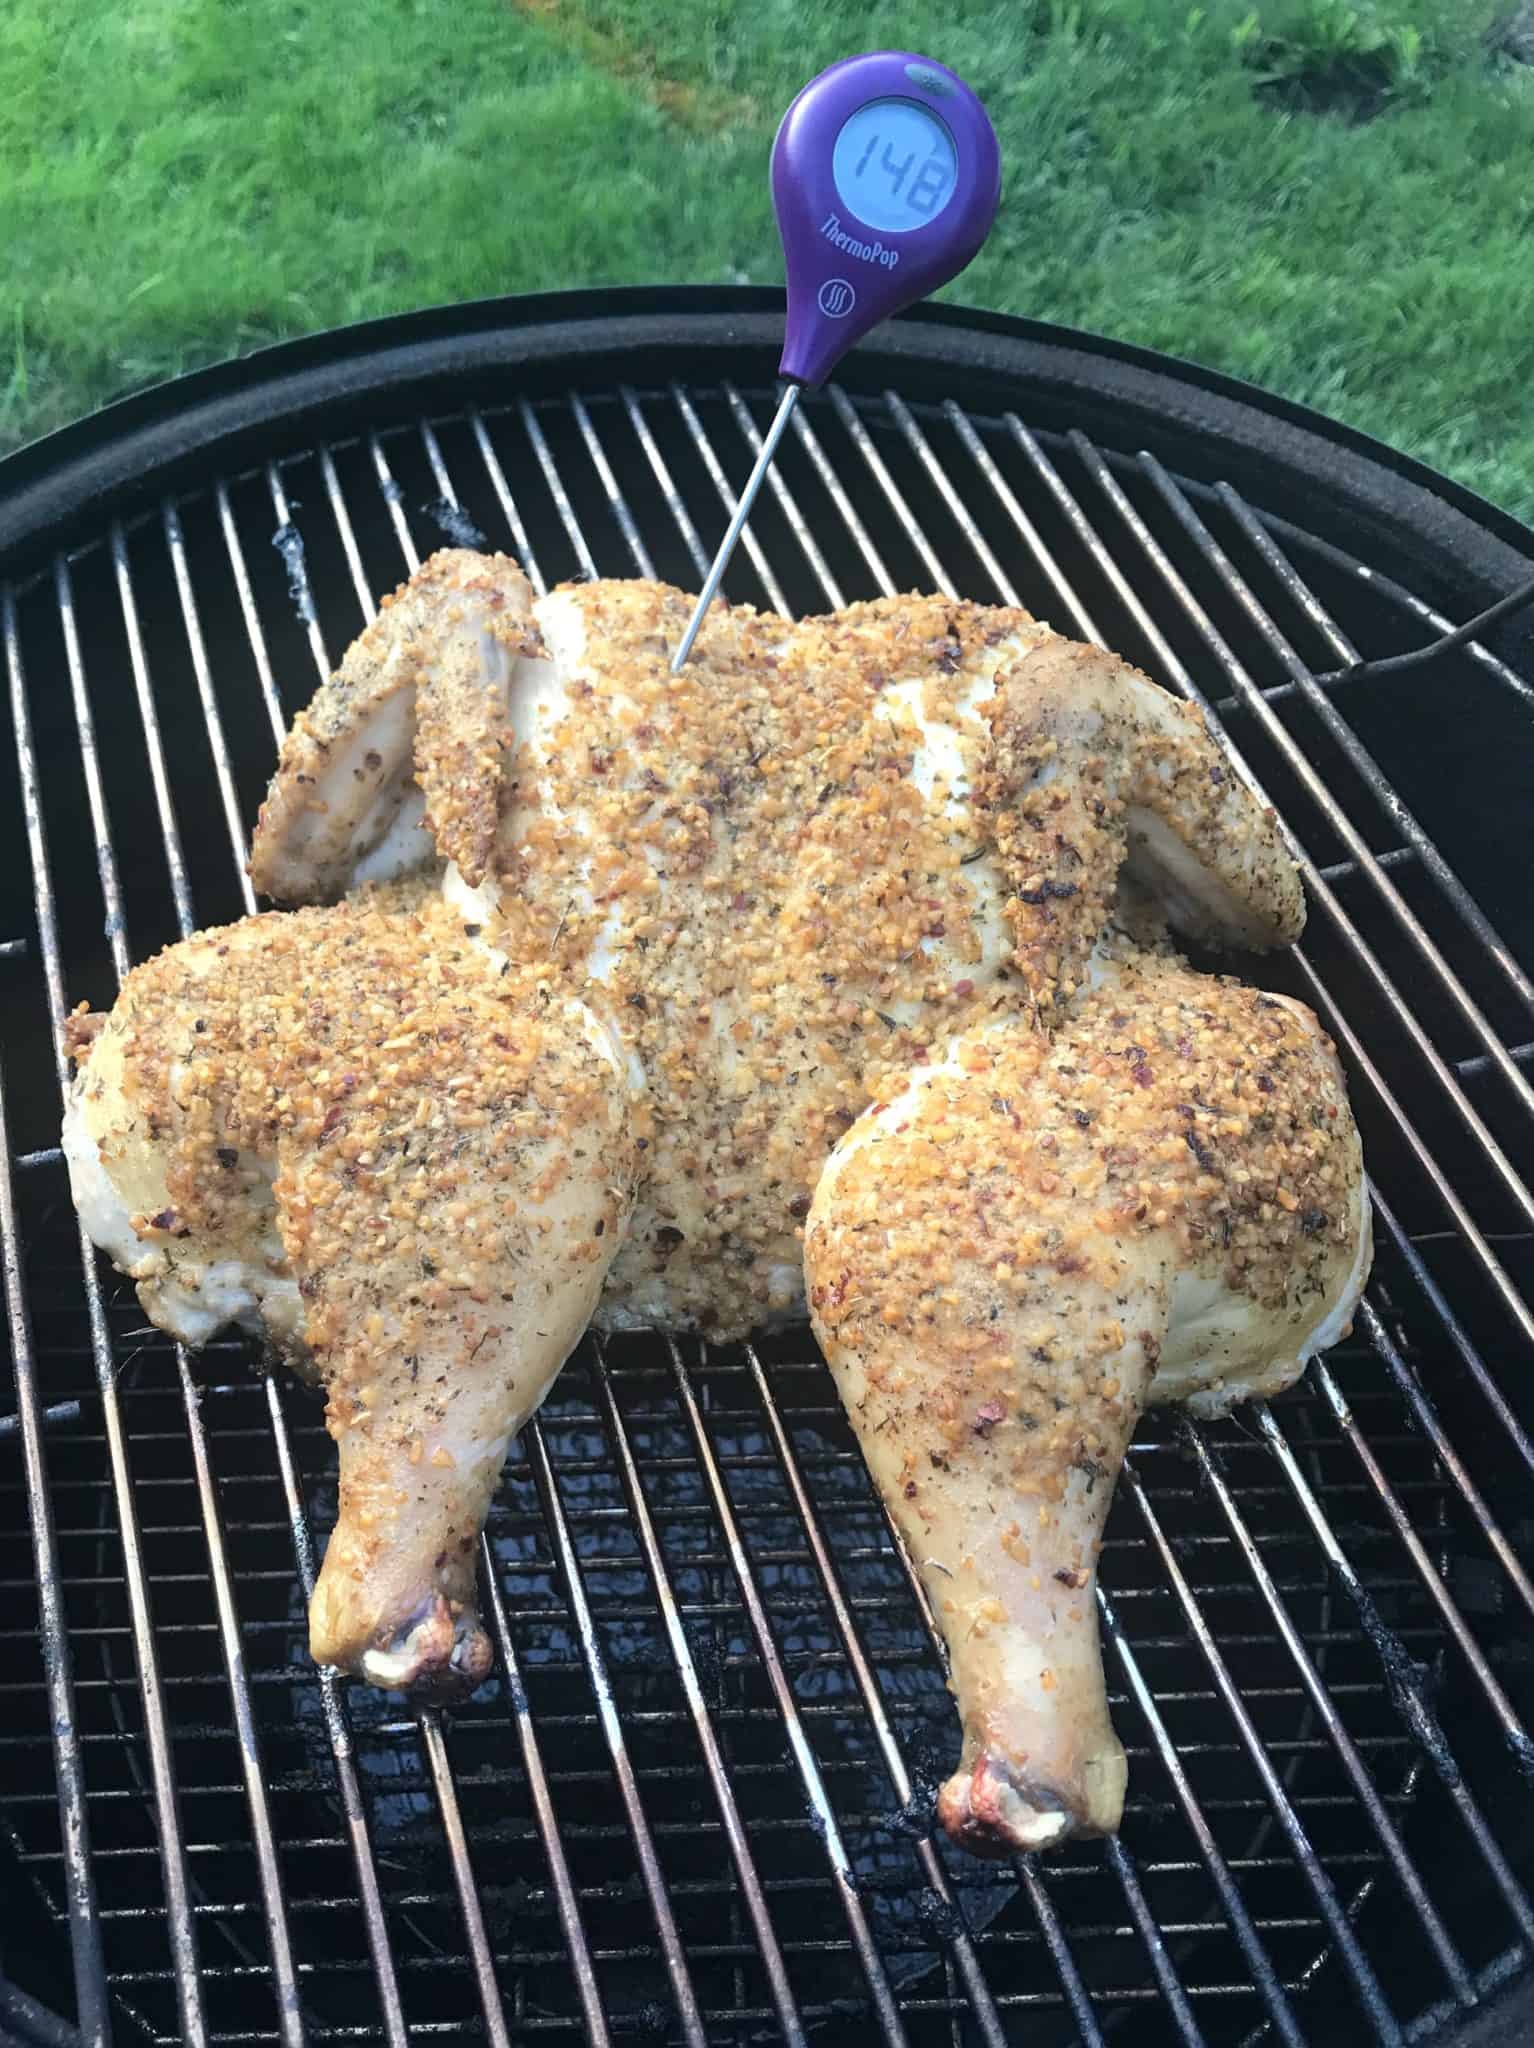 Spatchcocked chicken on weber grill with thermometer sticking out side view